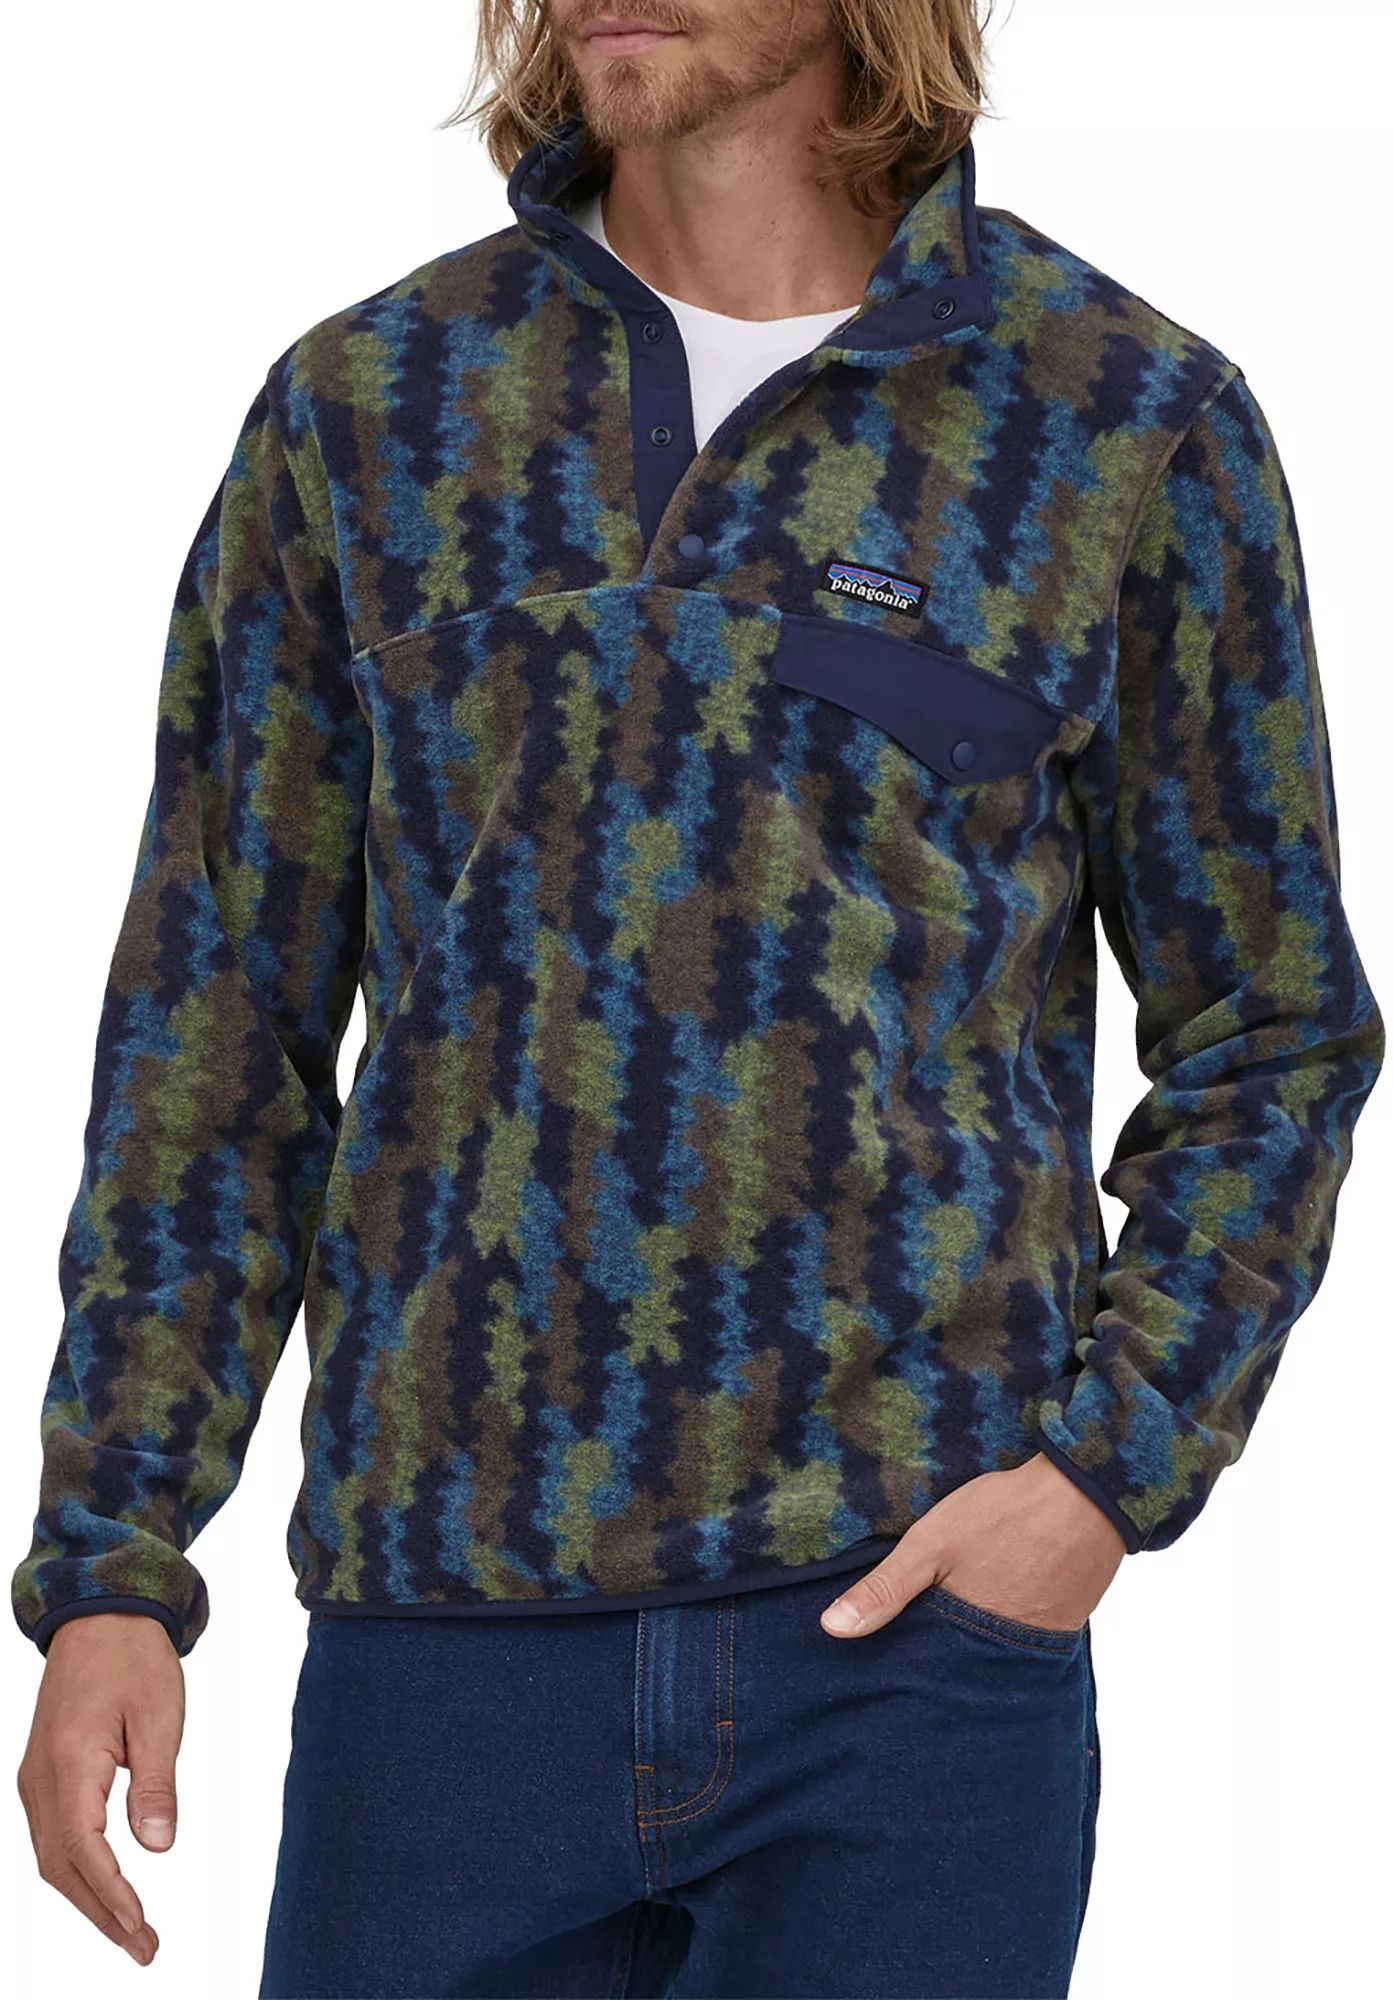 Patagonia Mens' Lightweight Synchilla Snap Fleece Pullover, Men's, Small, Climbing Trees Ikat/NwNvy | Dick's Sporting Goods